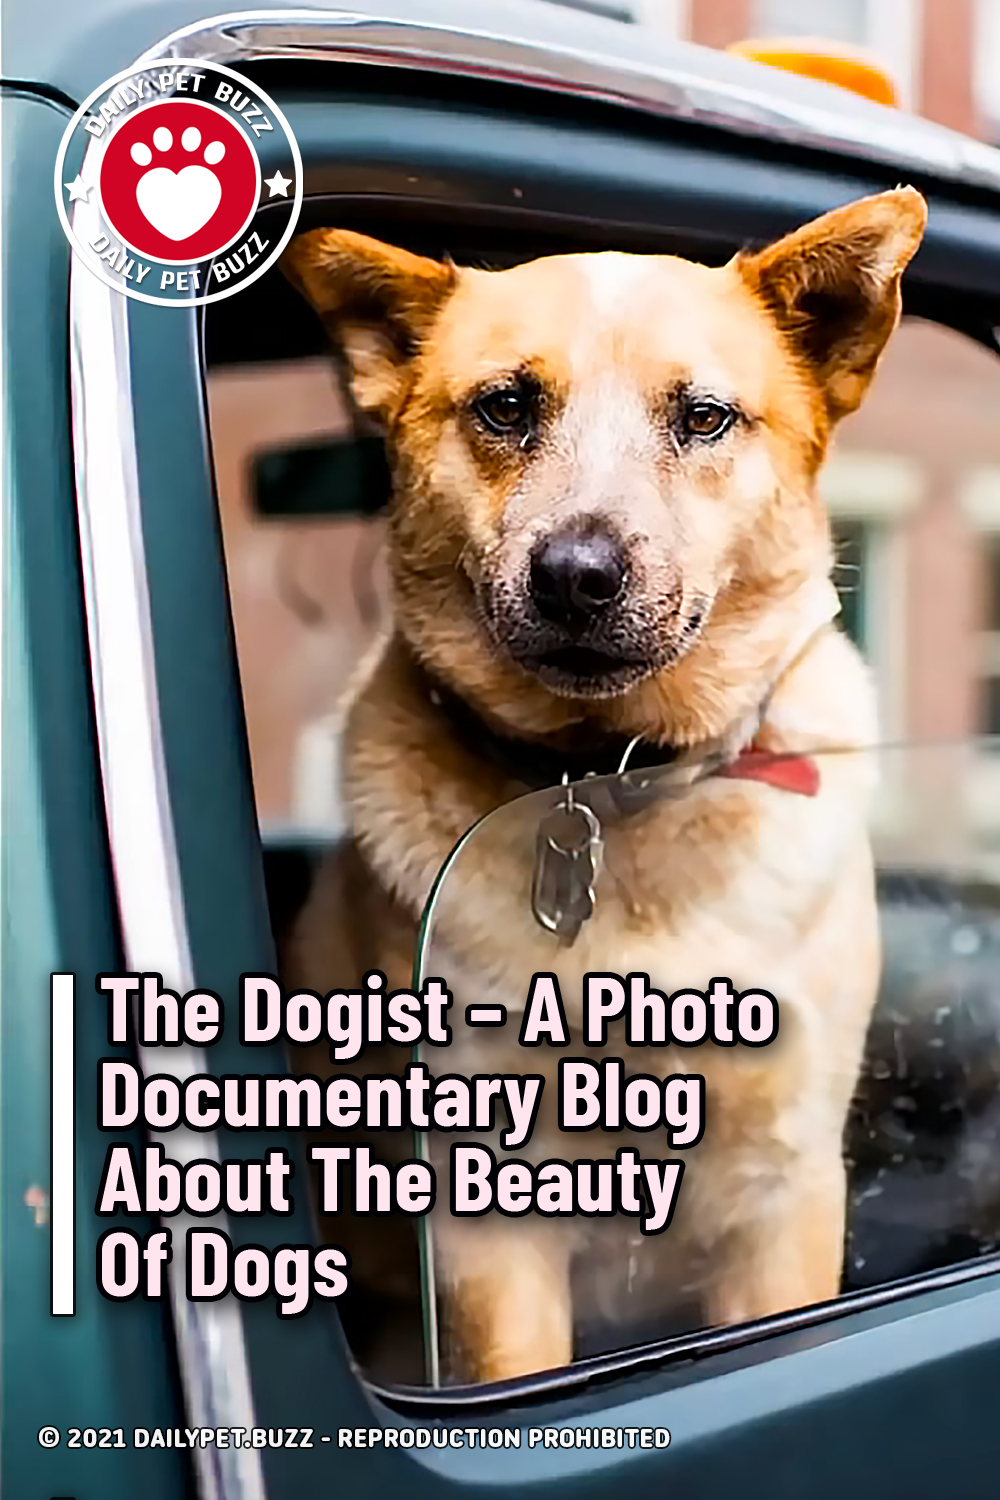 The Dogist – A Photo Documentary Blog About The Beauty Of Dogs